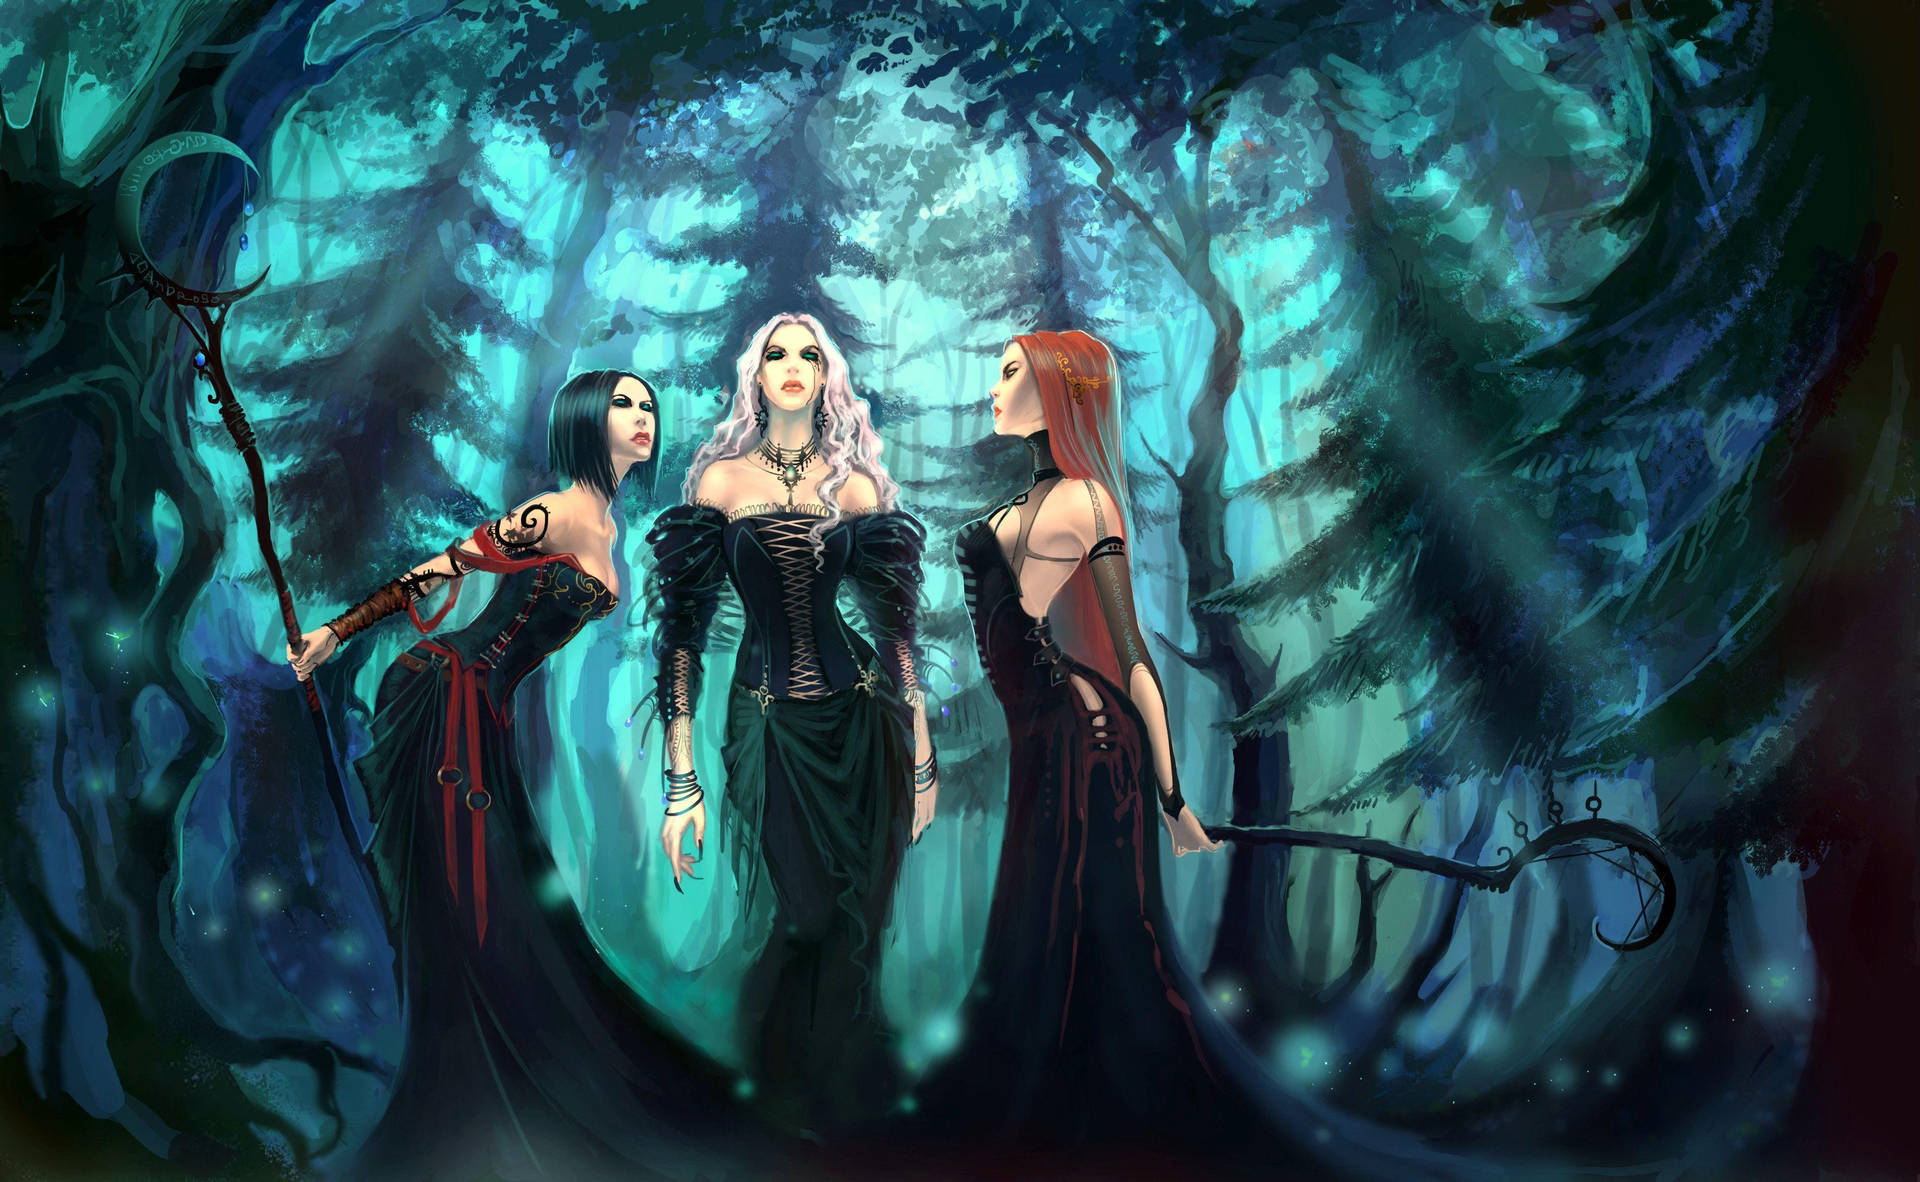 Witches In Magical Forest